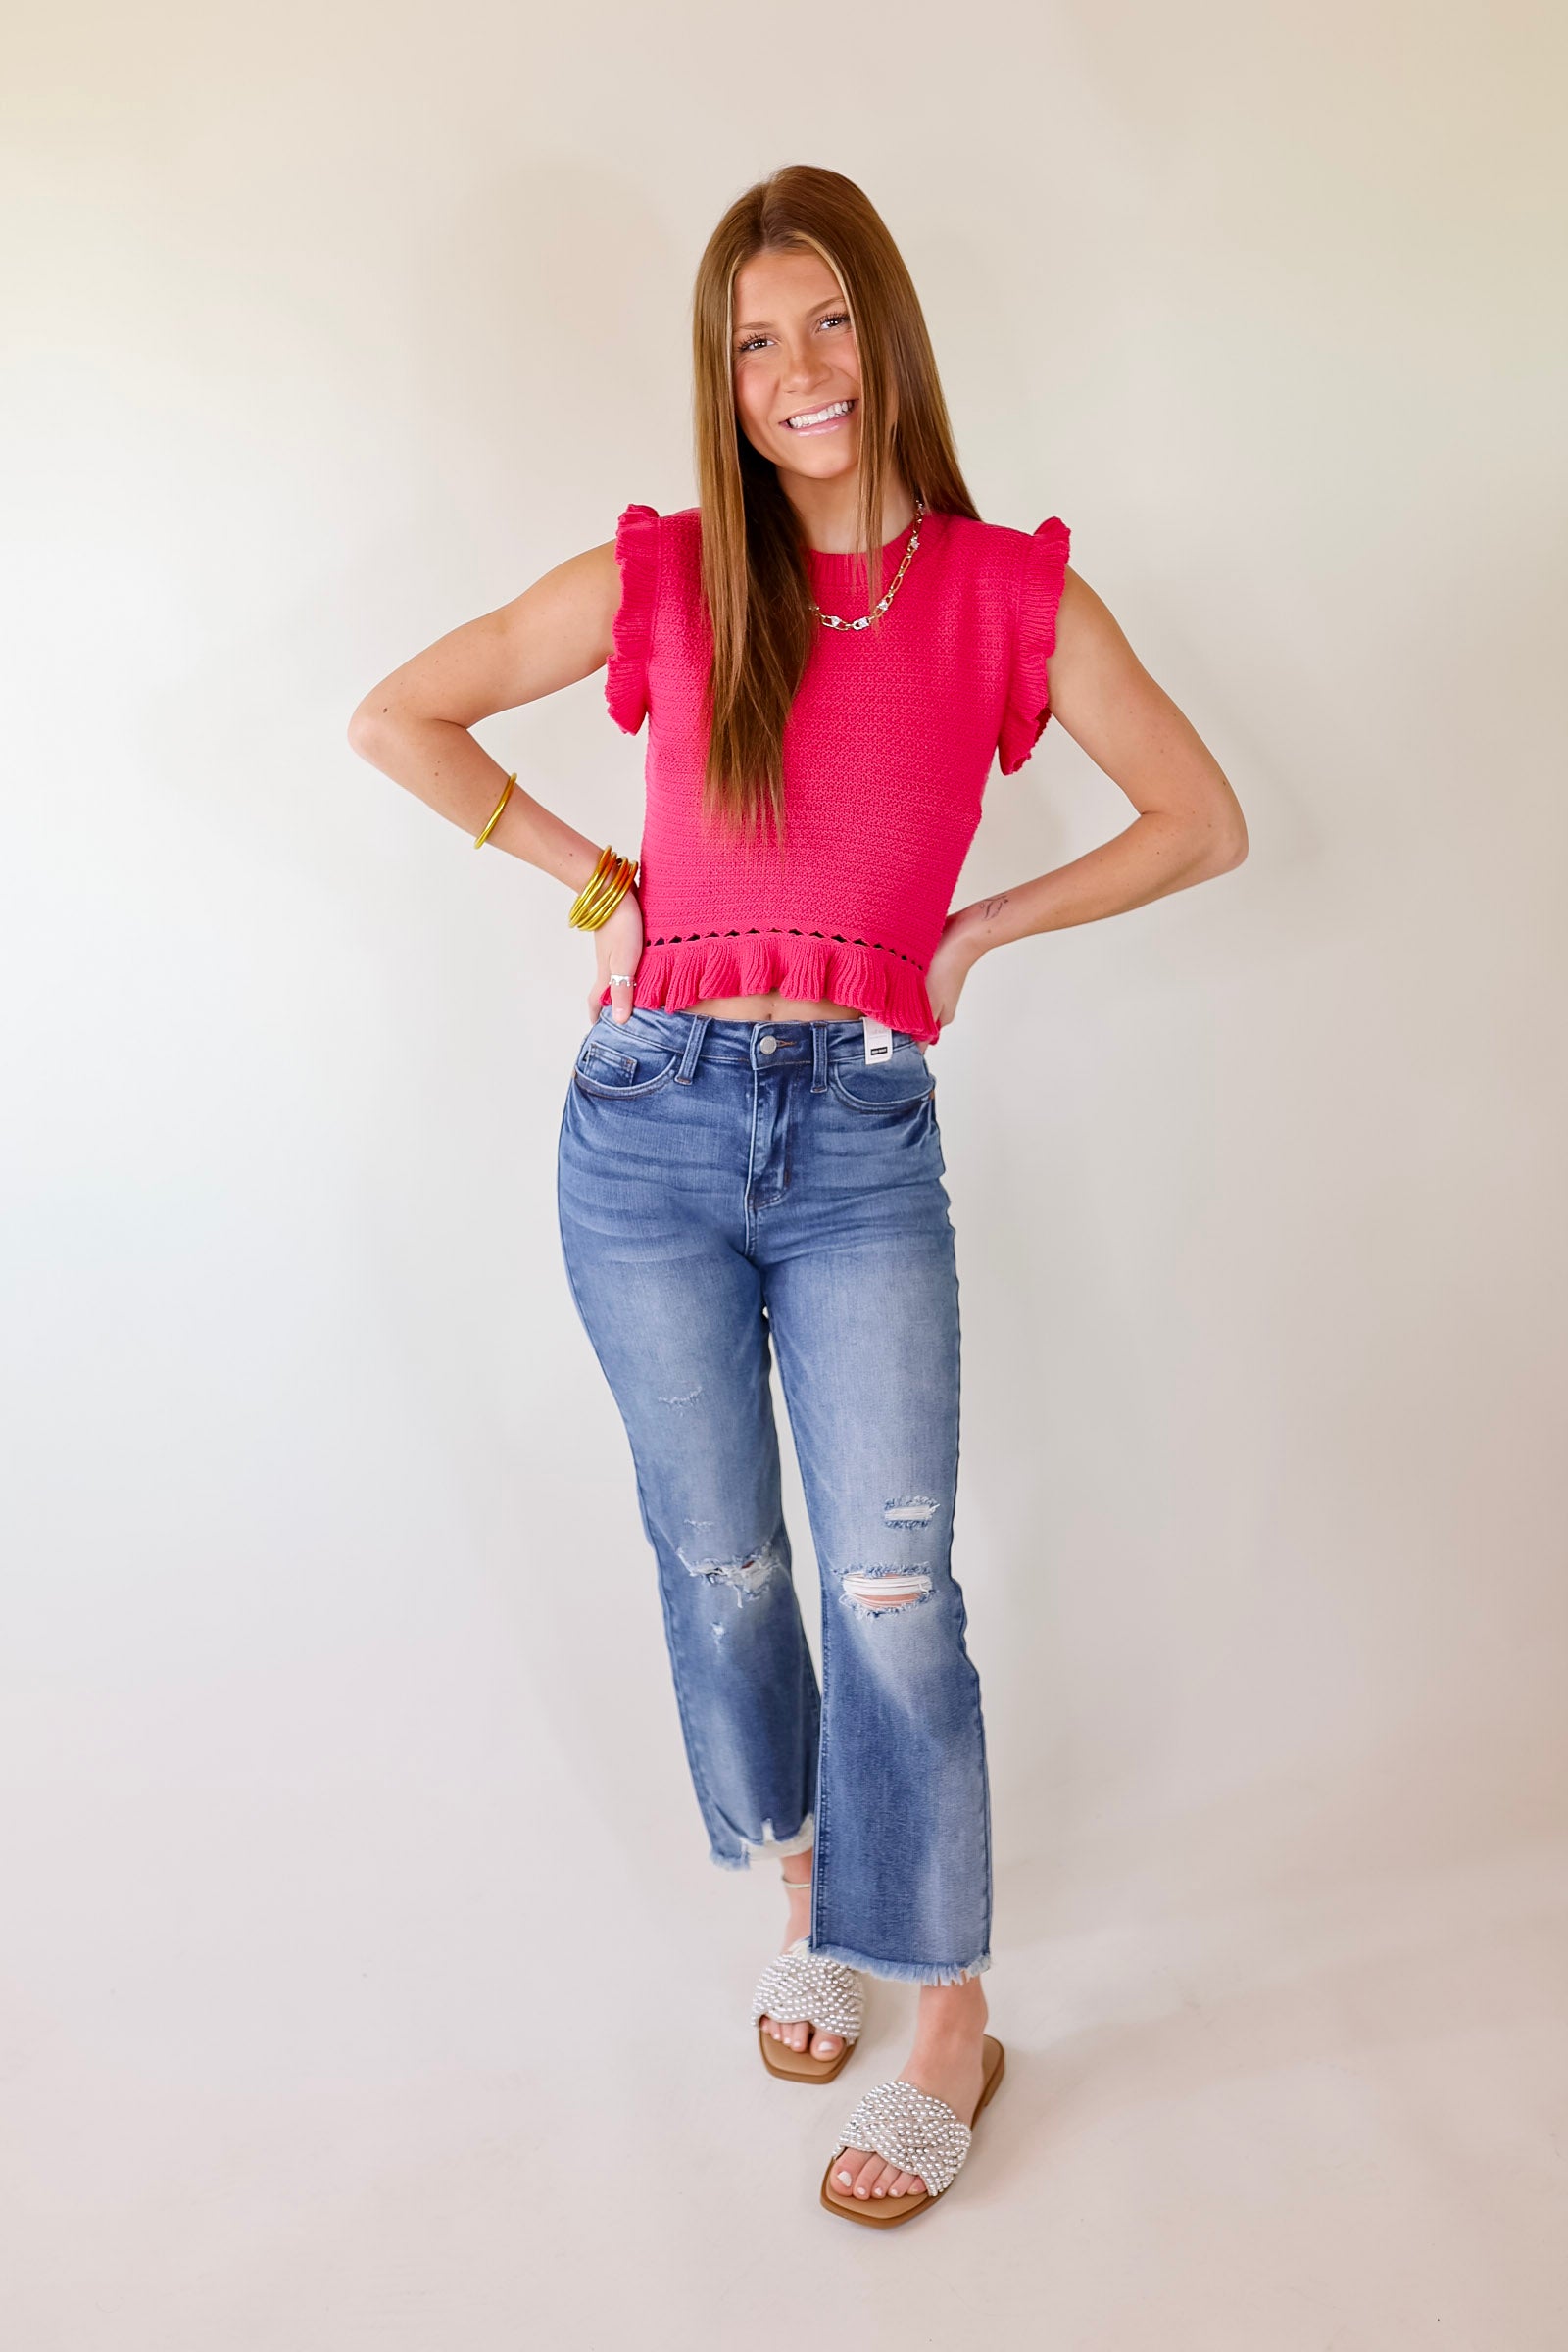 Breezy Baby Cropped Sweater with Ruffle Cap Sleeves in Hot Pink